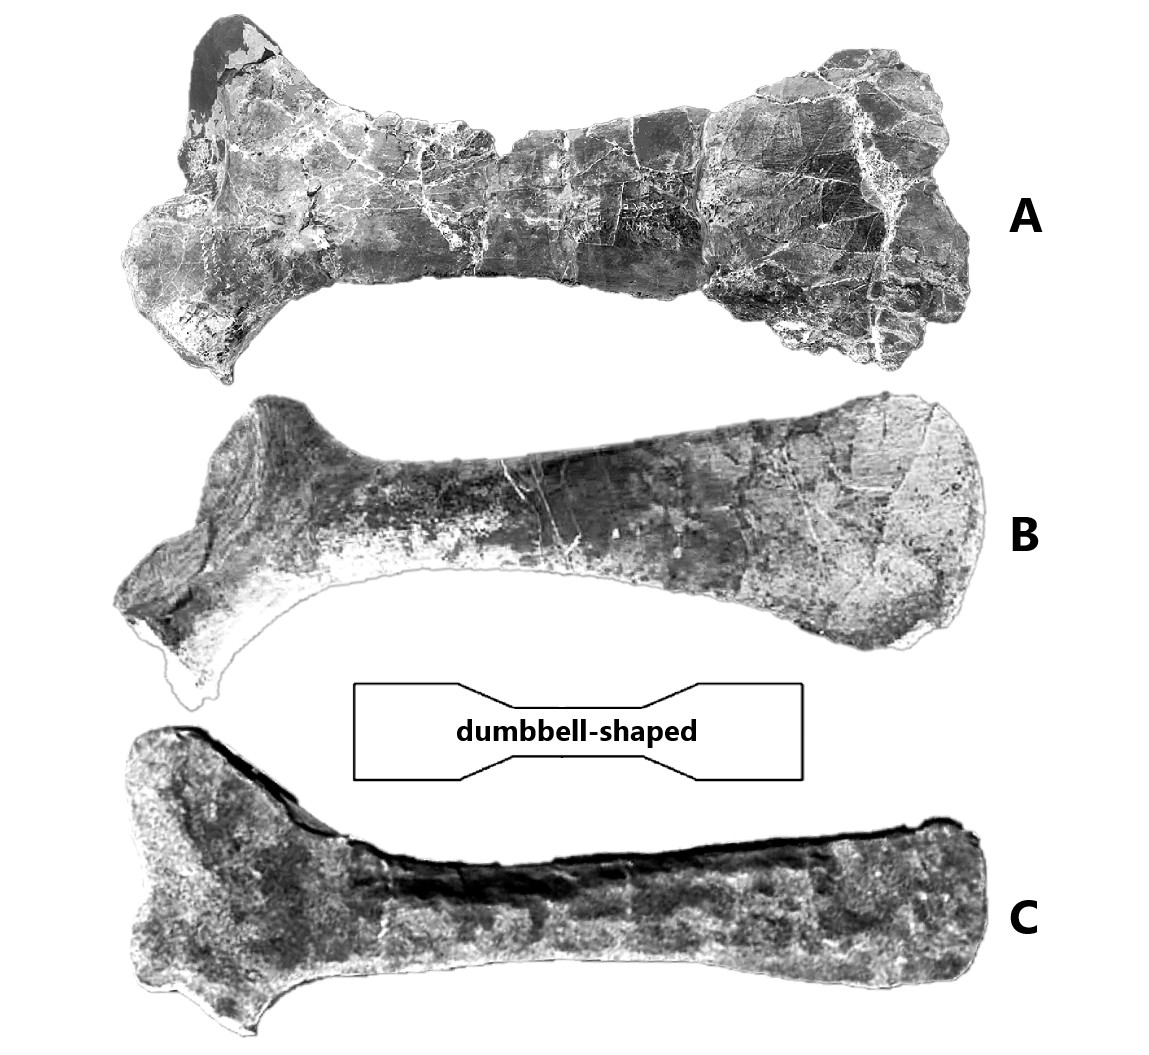 Comparison of scapula between species recommended group under Order Aliacollisauria. One of the typical structure morphology pose from Aliacollisauria is dumbbell-shaped scapula. From top to bottom: A. Dilophosaurus wetherilli[13]; B. Plateosaurus trossingensis[16]; and C. Suchomimus tenerensis (reconstructed)[17].